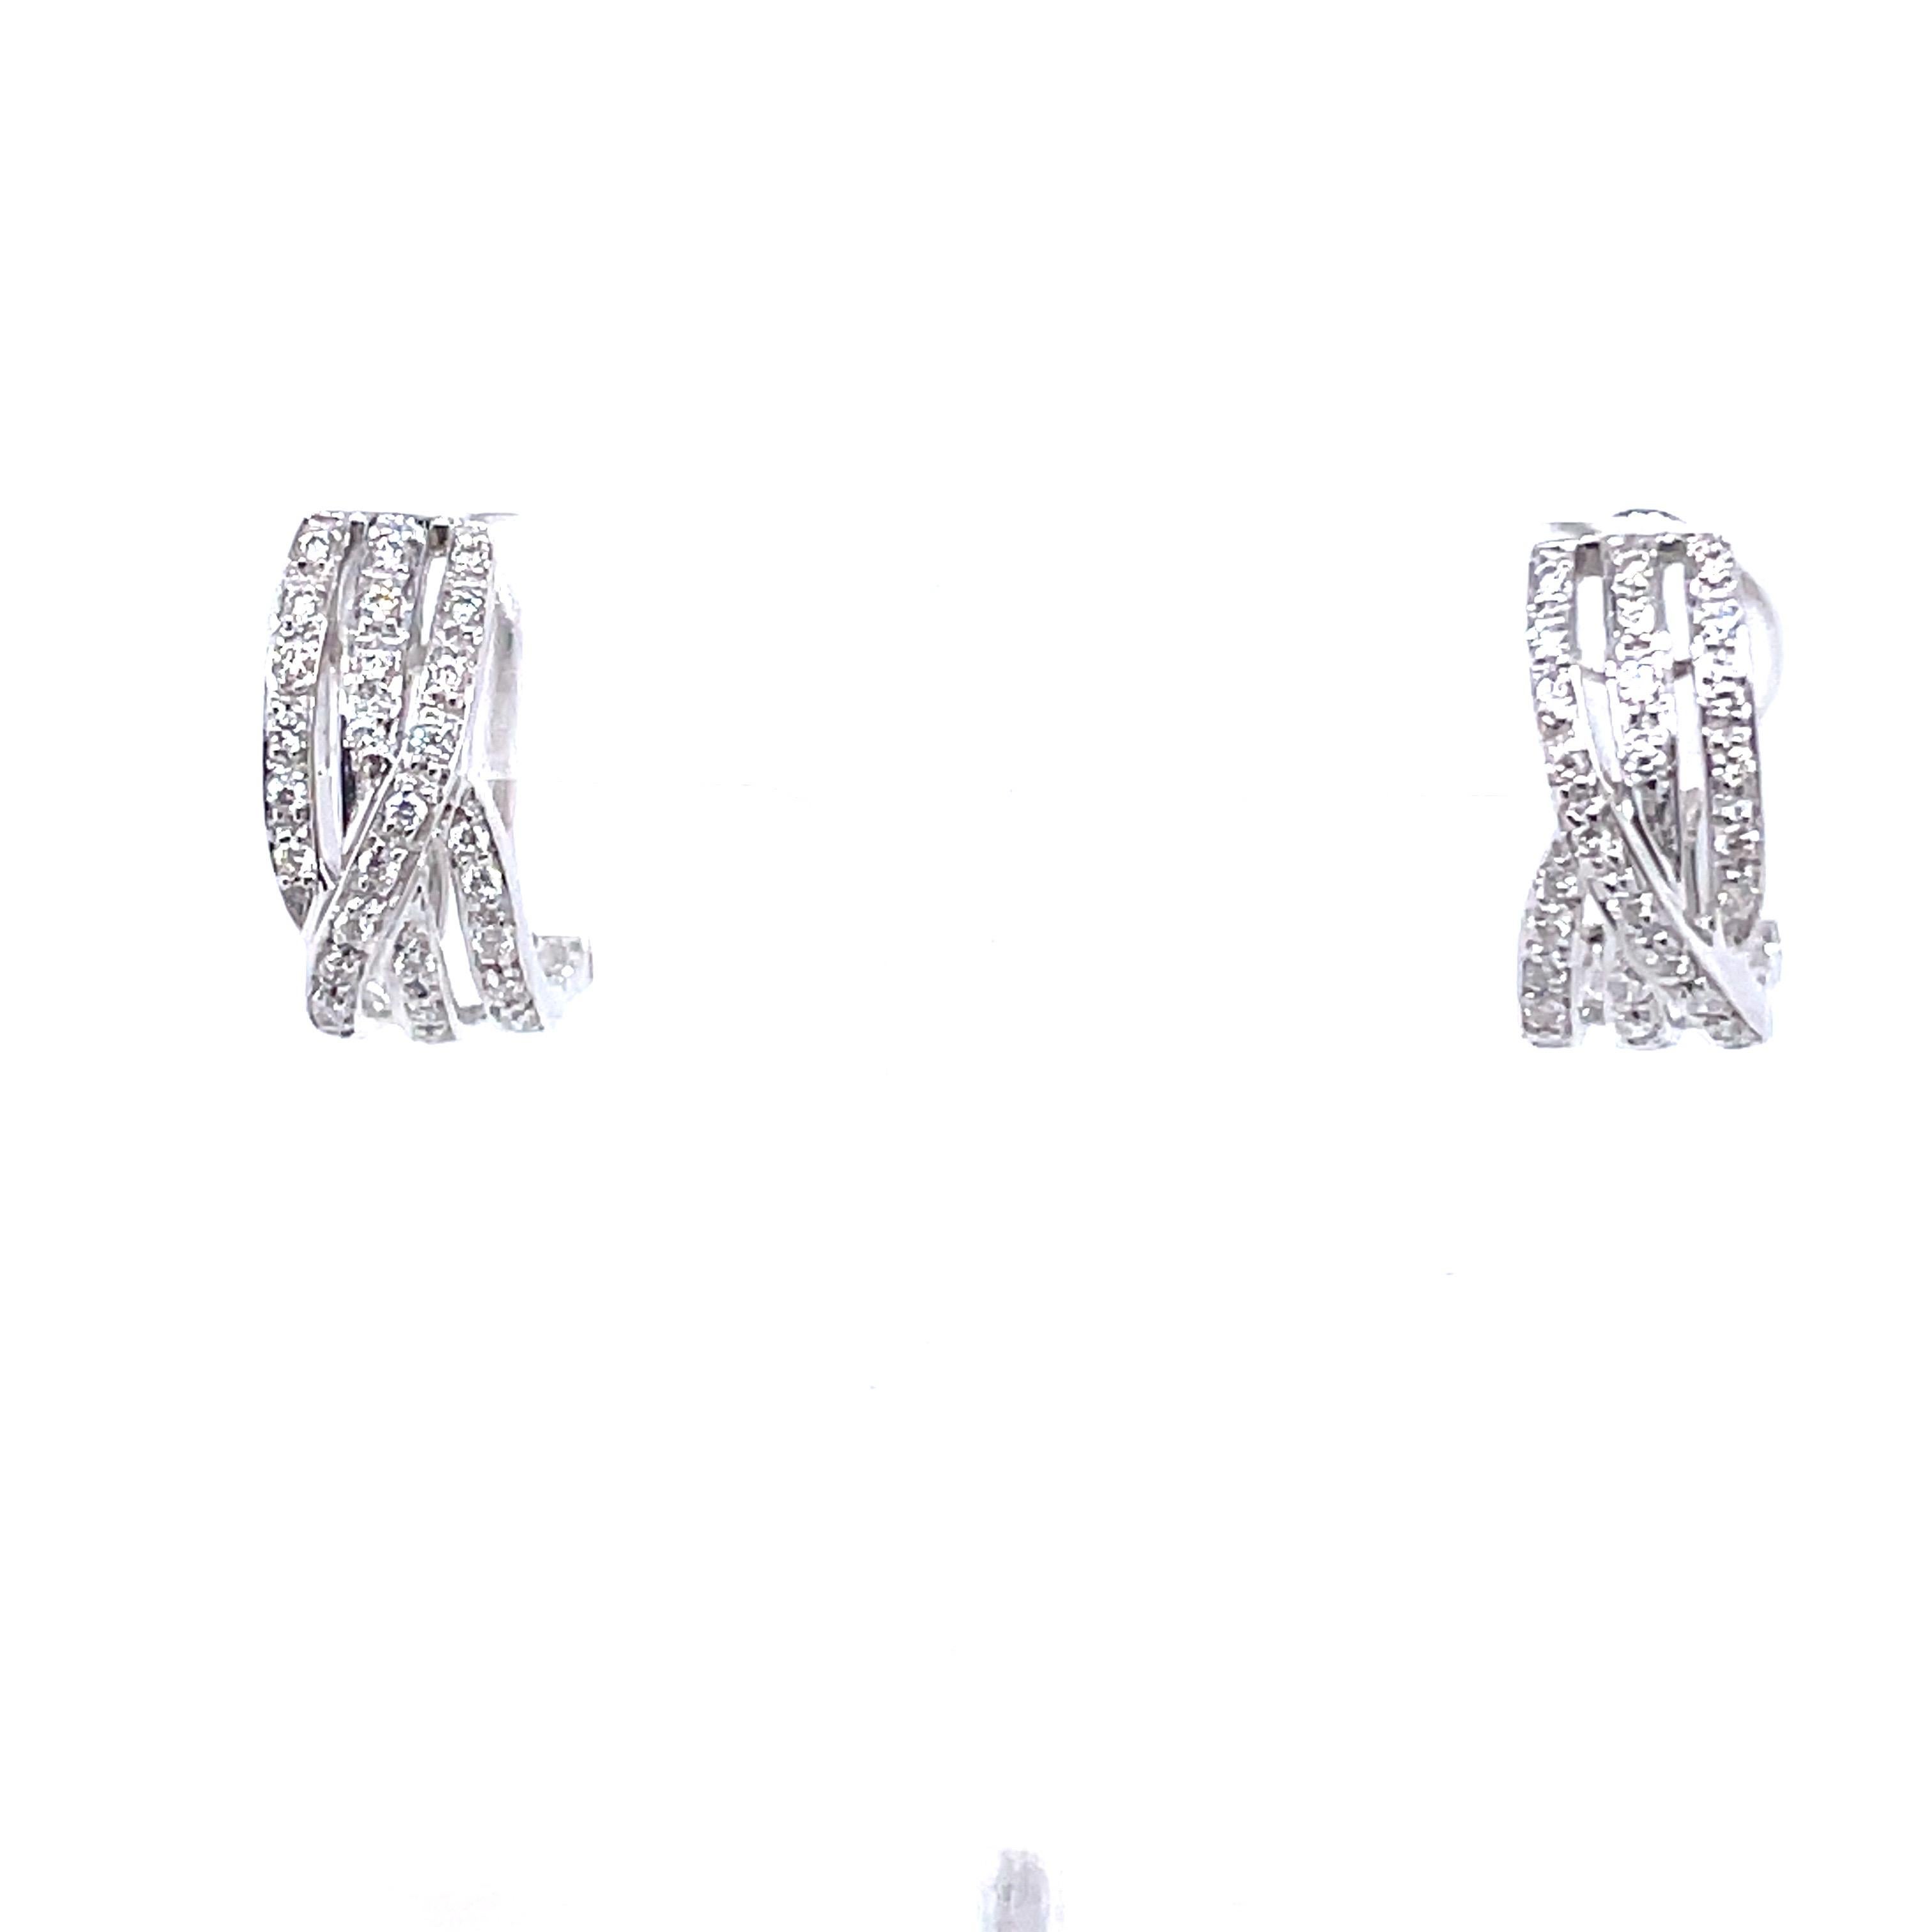 Crafted with a mesmerizing dance of curved lines, these earrings boast a total of 0.38 carats of dazzling round diamonds, set in 18k white gold weighing 4.72 grams.

Whether you're wearing these 18k white gold earrings for a formal evening event or